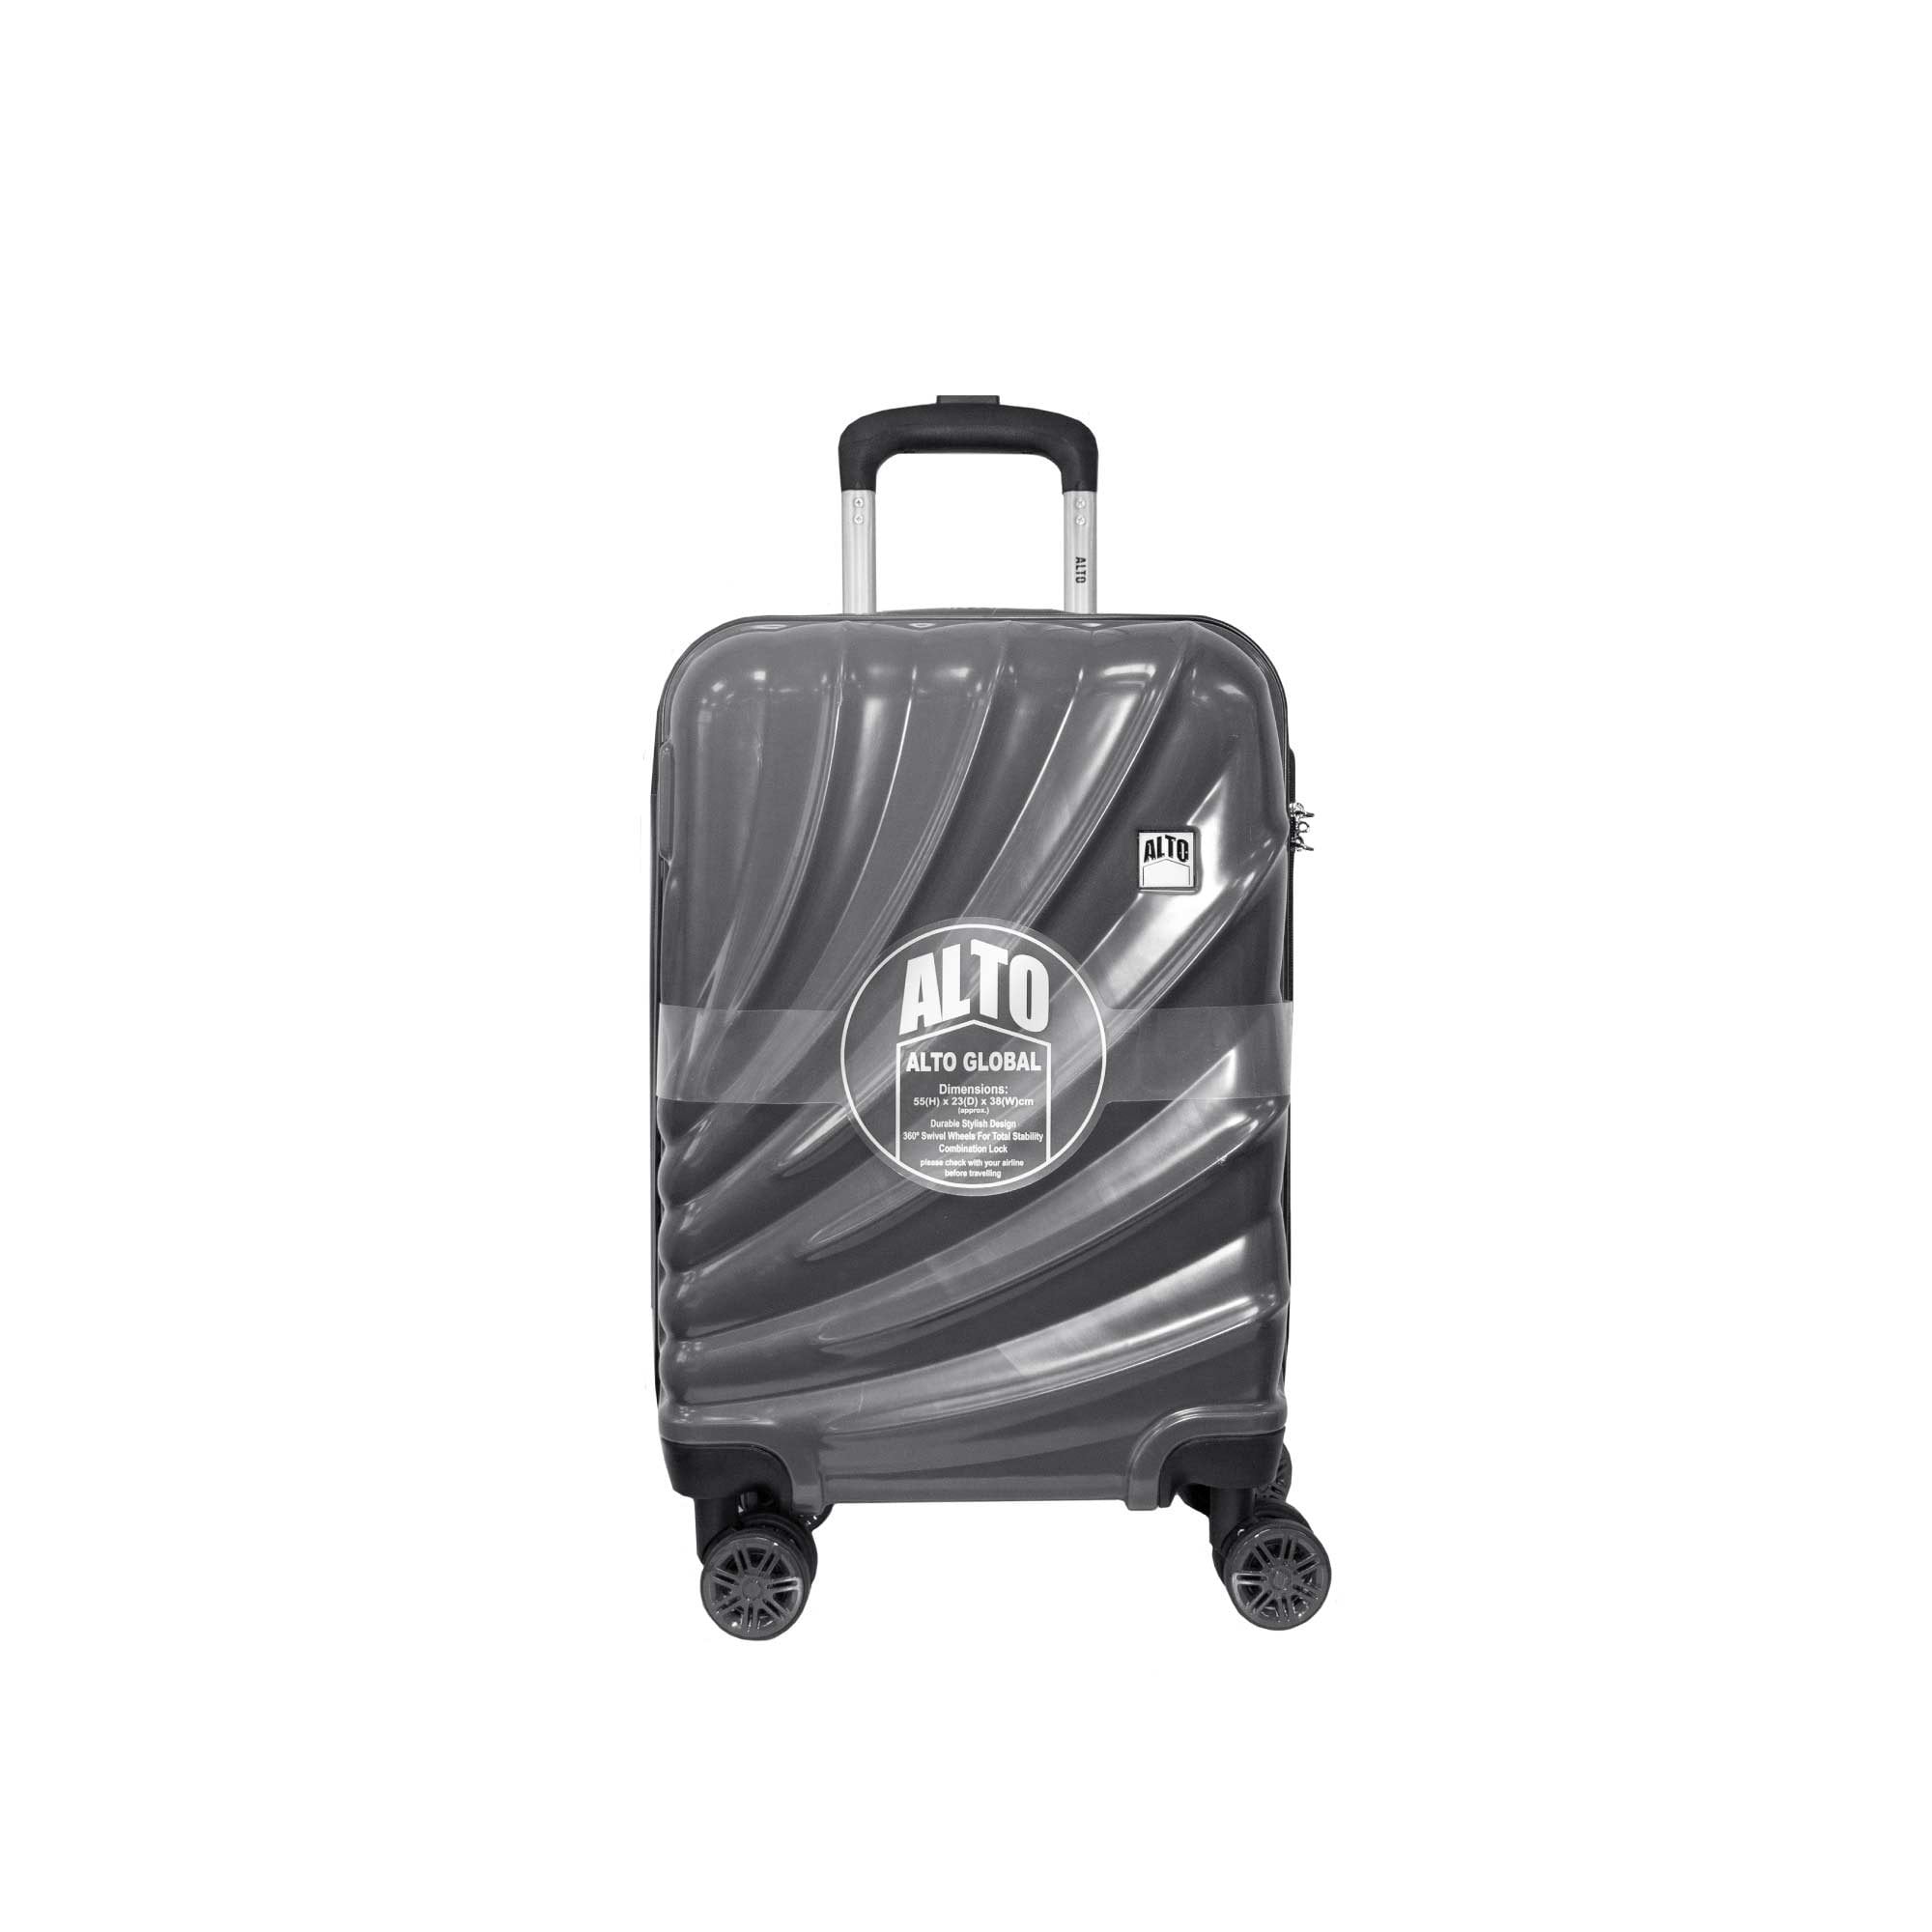 Alto Global ABS Luggage Suitcase - Charcoal - Cabin  | TJ Hughes